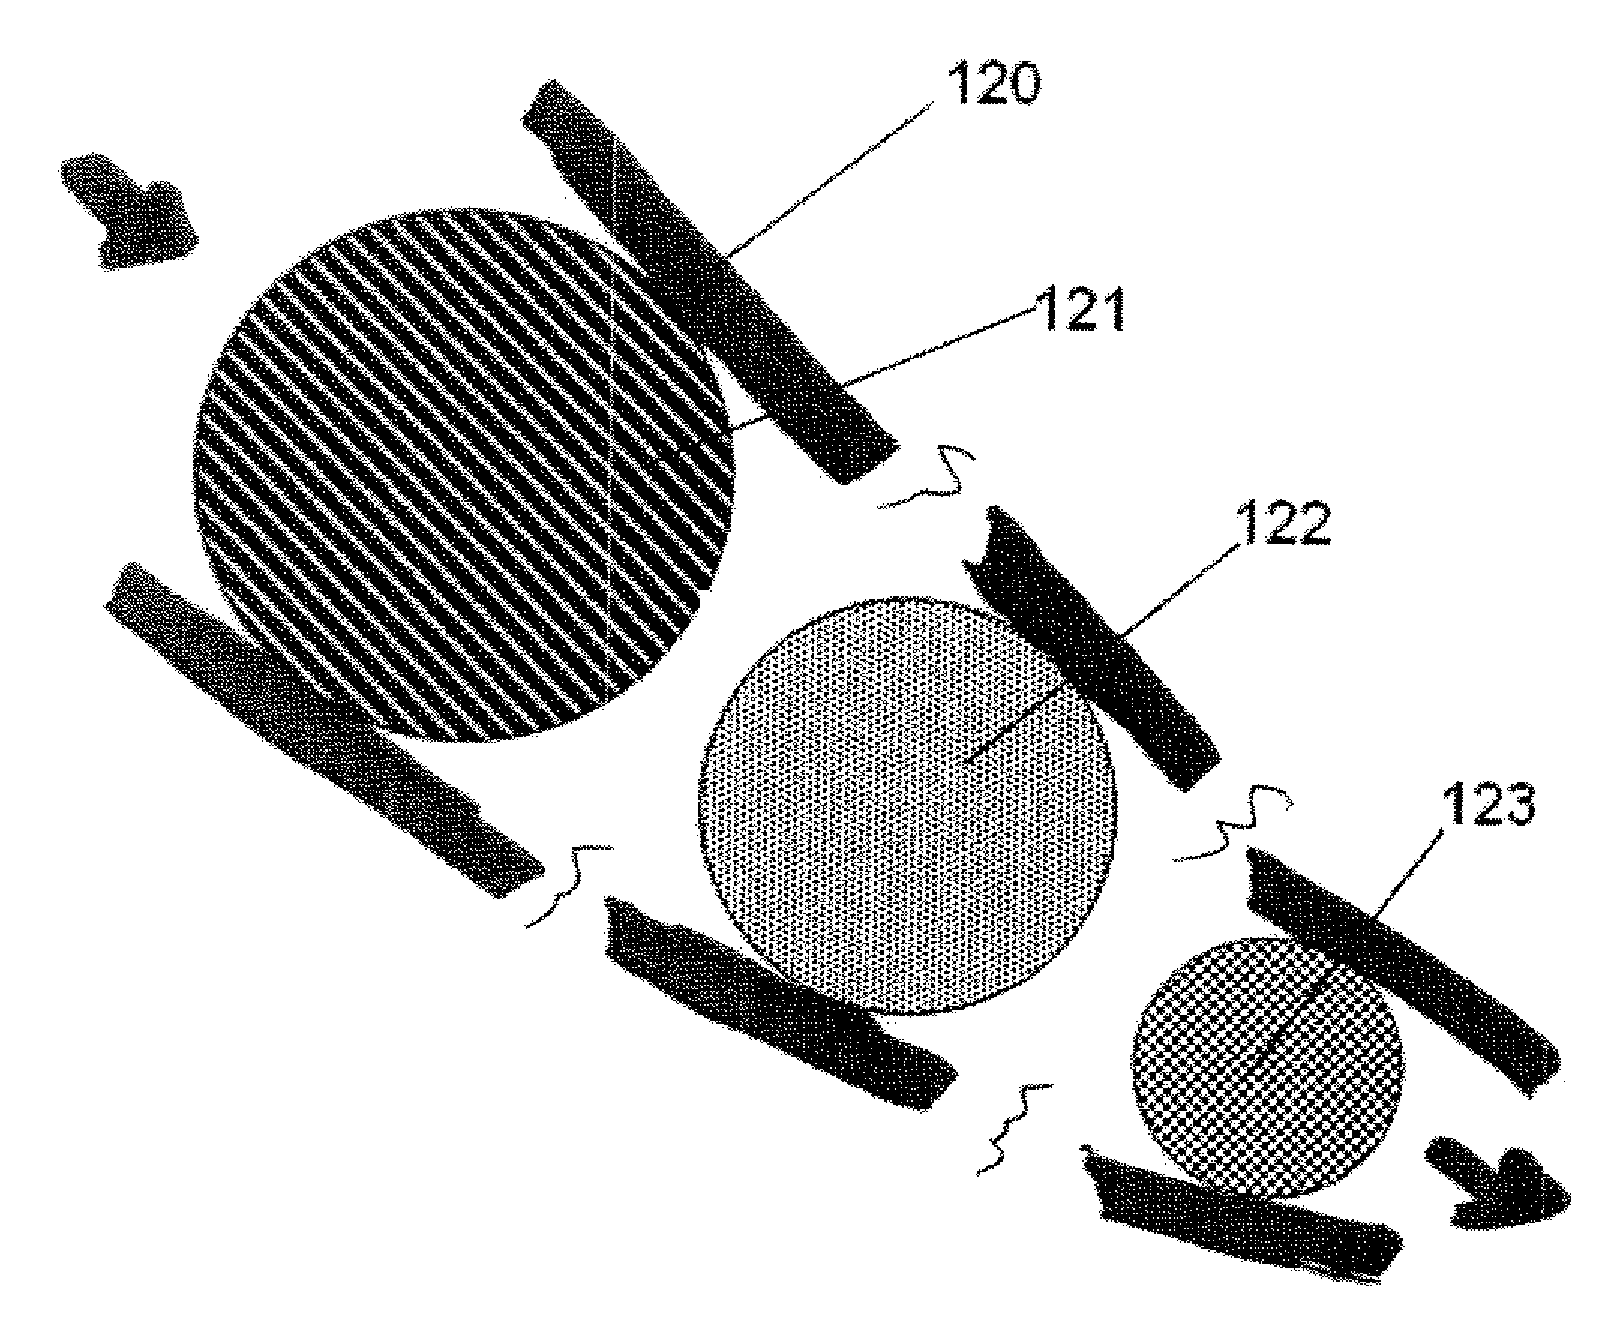 Color-Coded and Sized Loadable Polymeric Particles for Therapeutic and/or Diagnostic Applications and Methods of Preparing and Using the Same